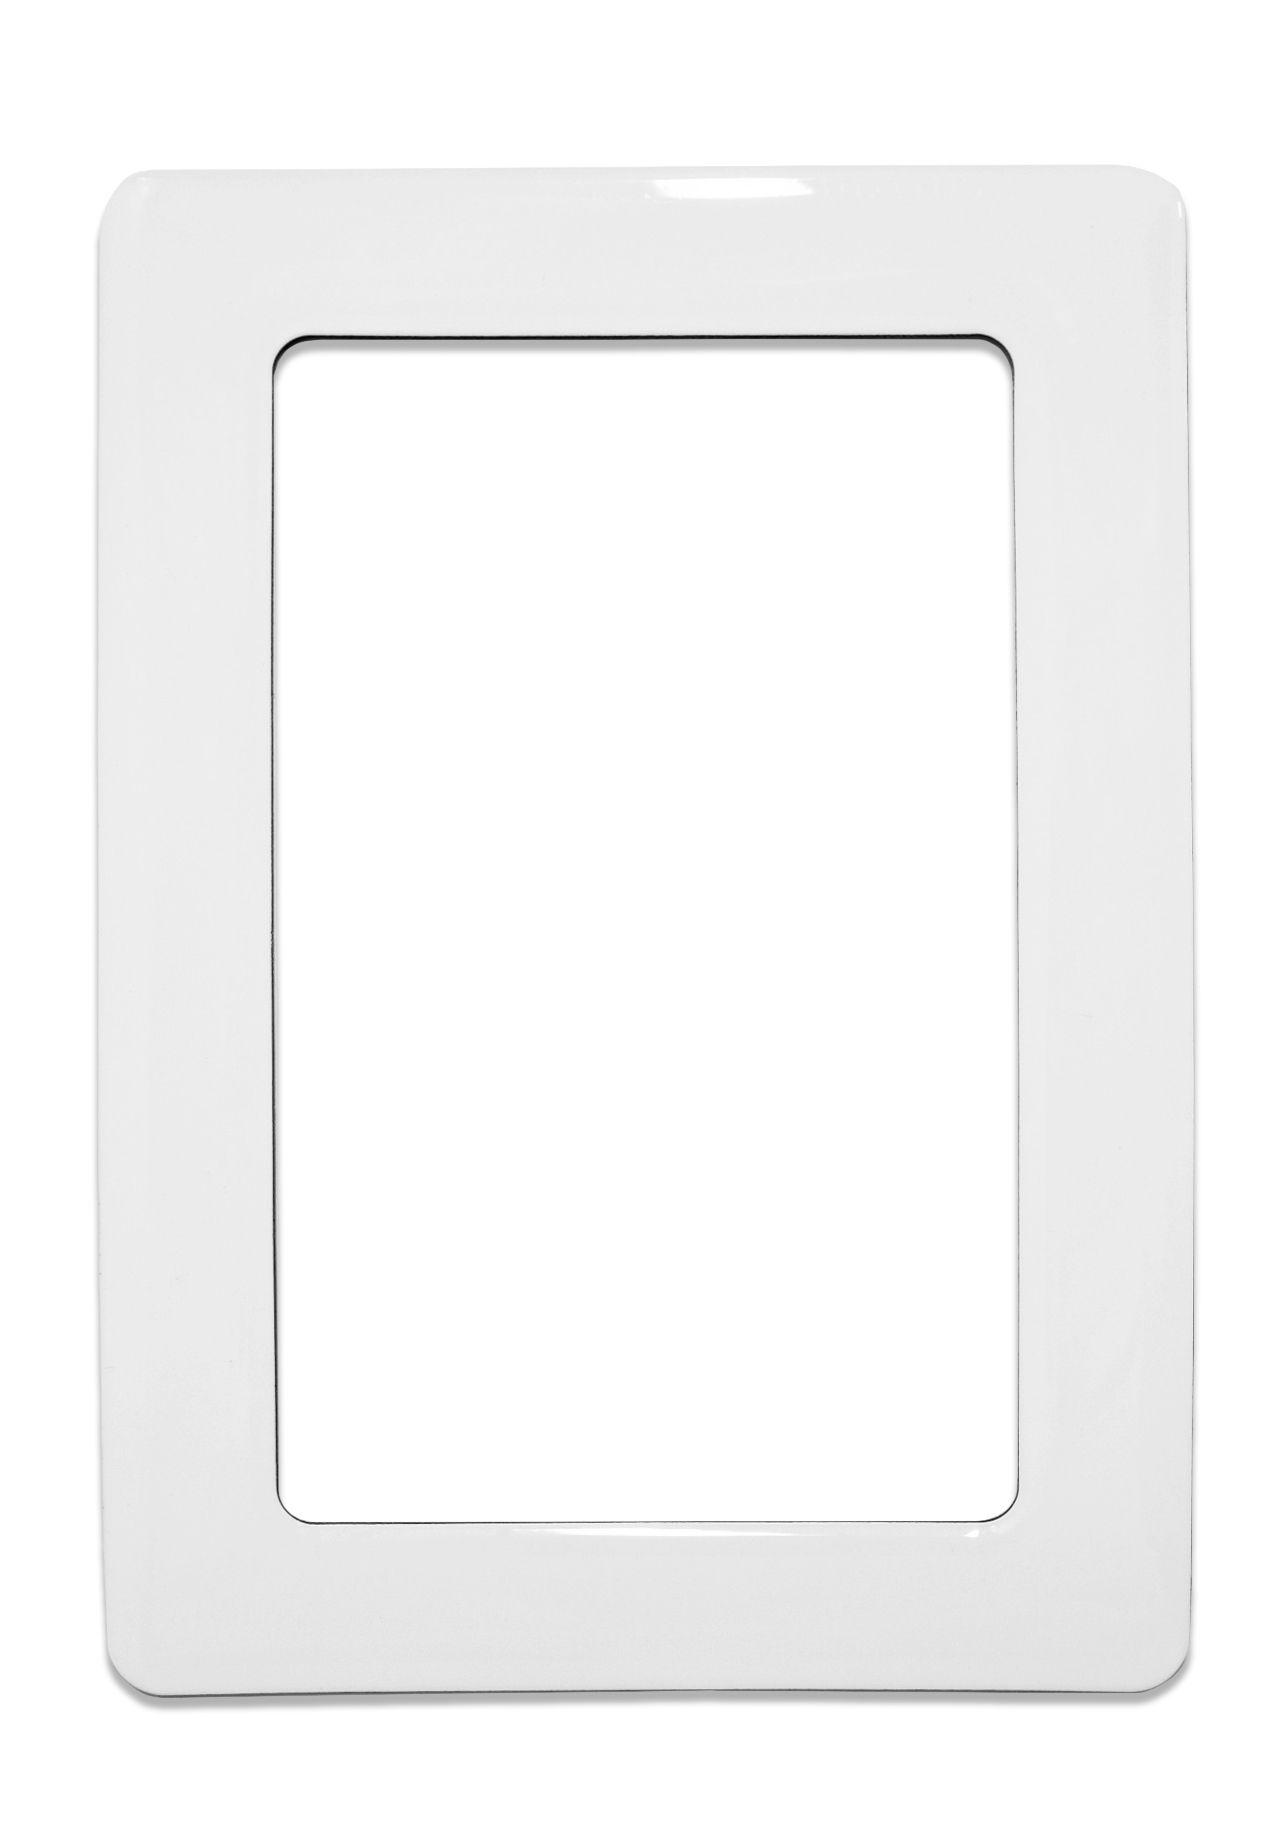 Magnetic self-adhesive frame size 13.0 × 8.1 cm - white